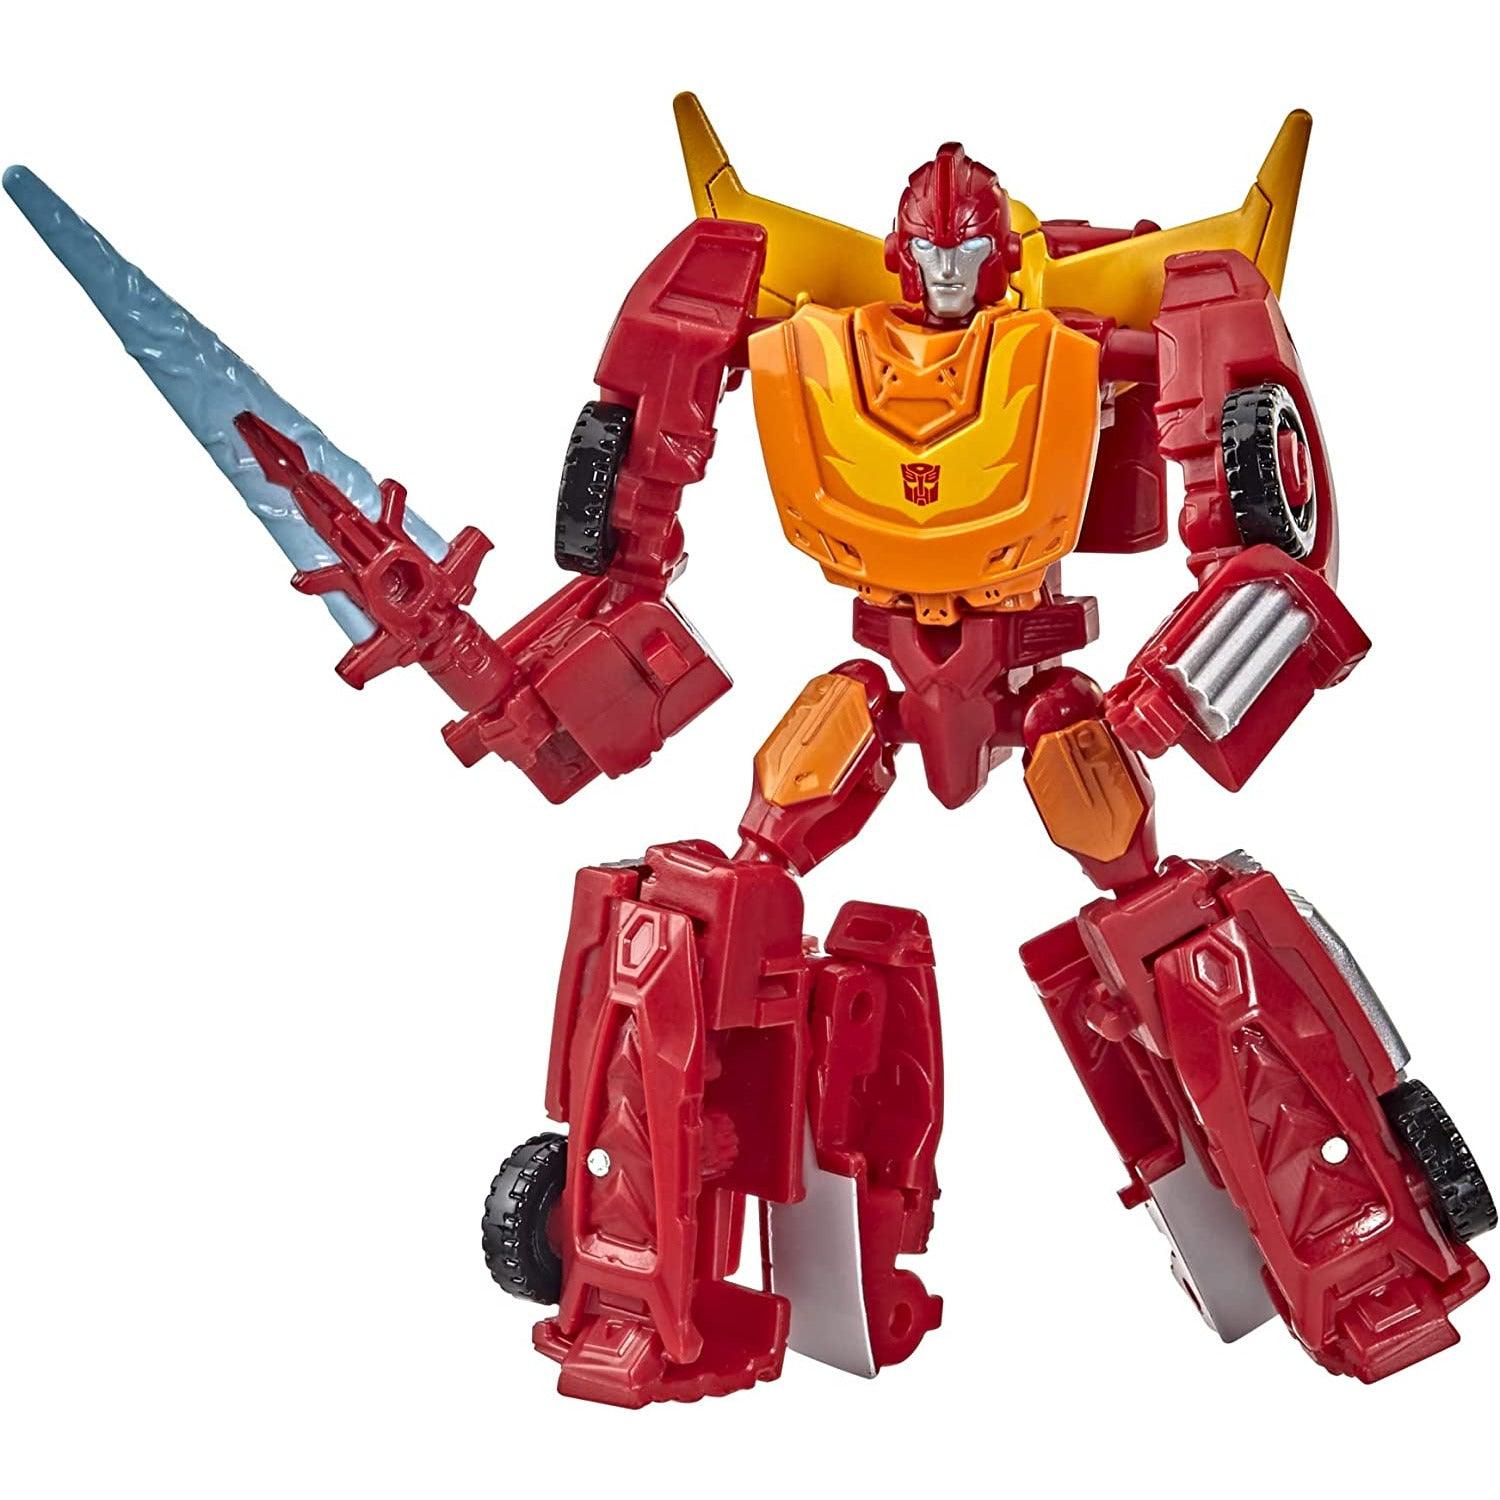 Transformers Toys Generations War for Cybertron: Kingdom Core Class WFC-K43 Autobot Hot Rod Action Figure - BumbleToys - 8+ Years, Boys, Figures, Pre-Order, Transformers